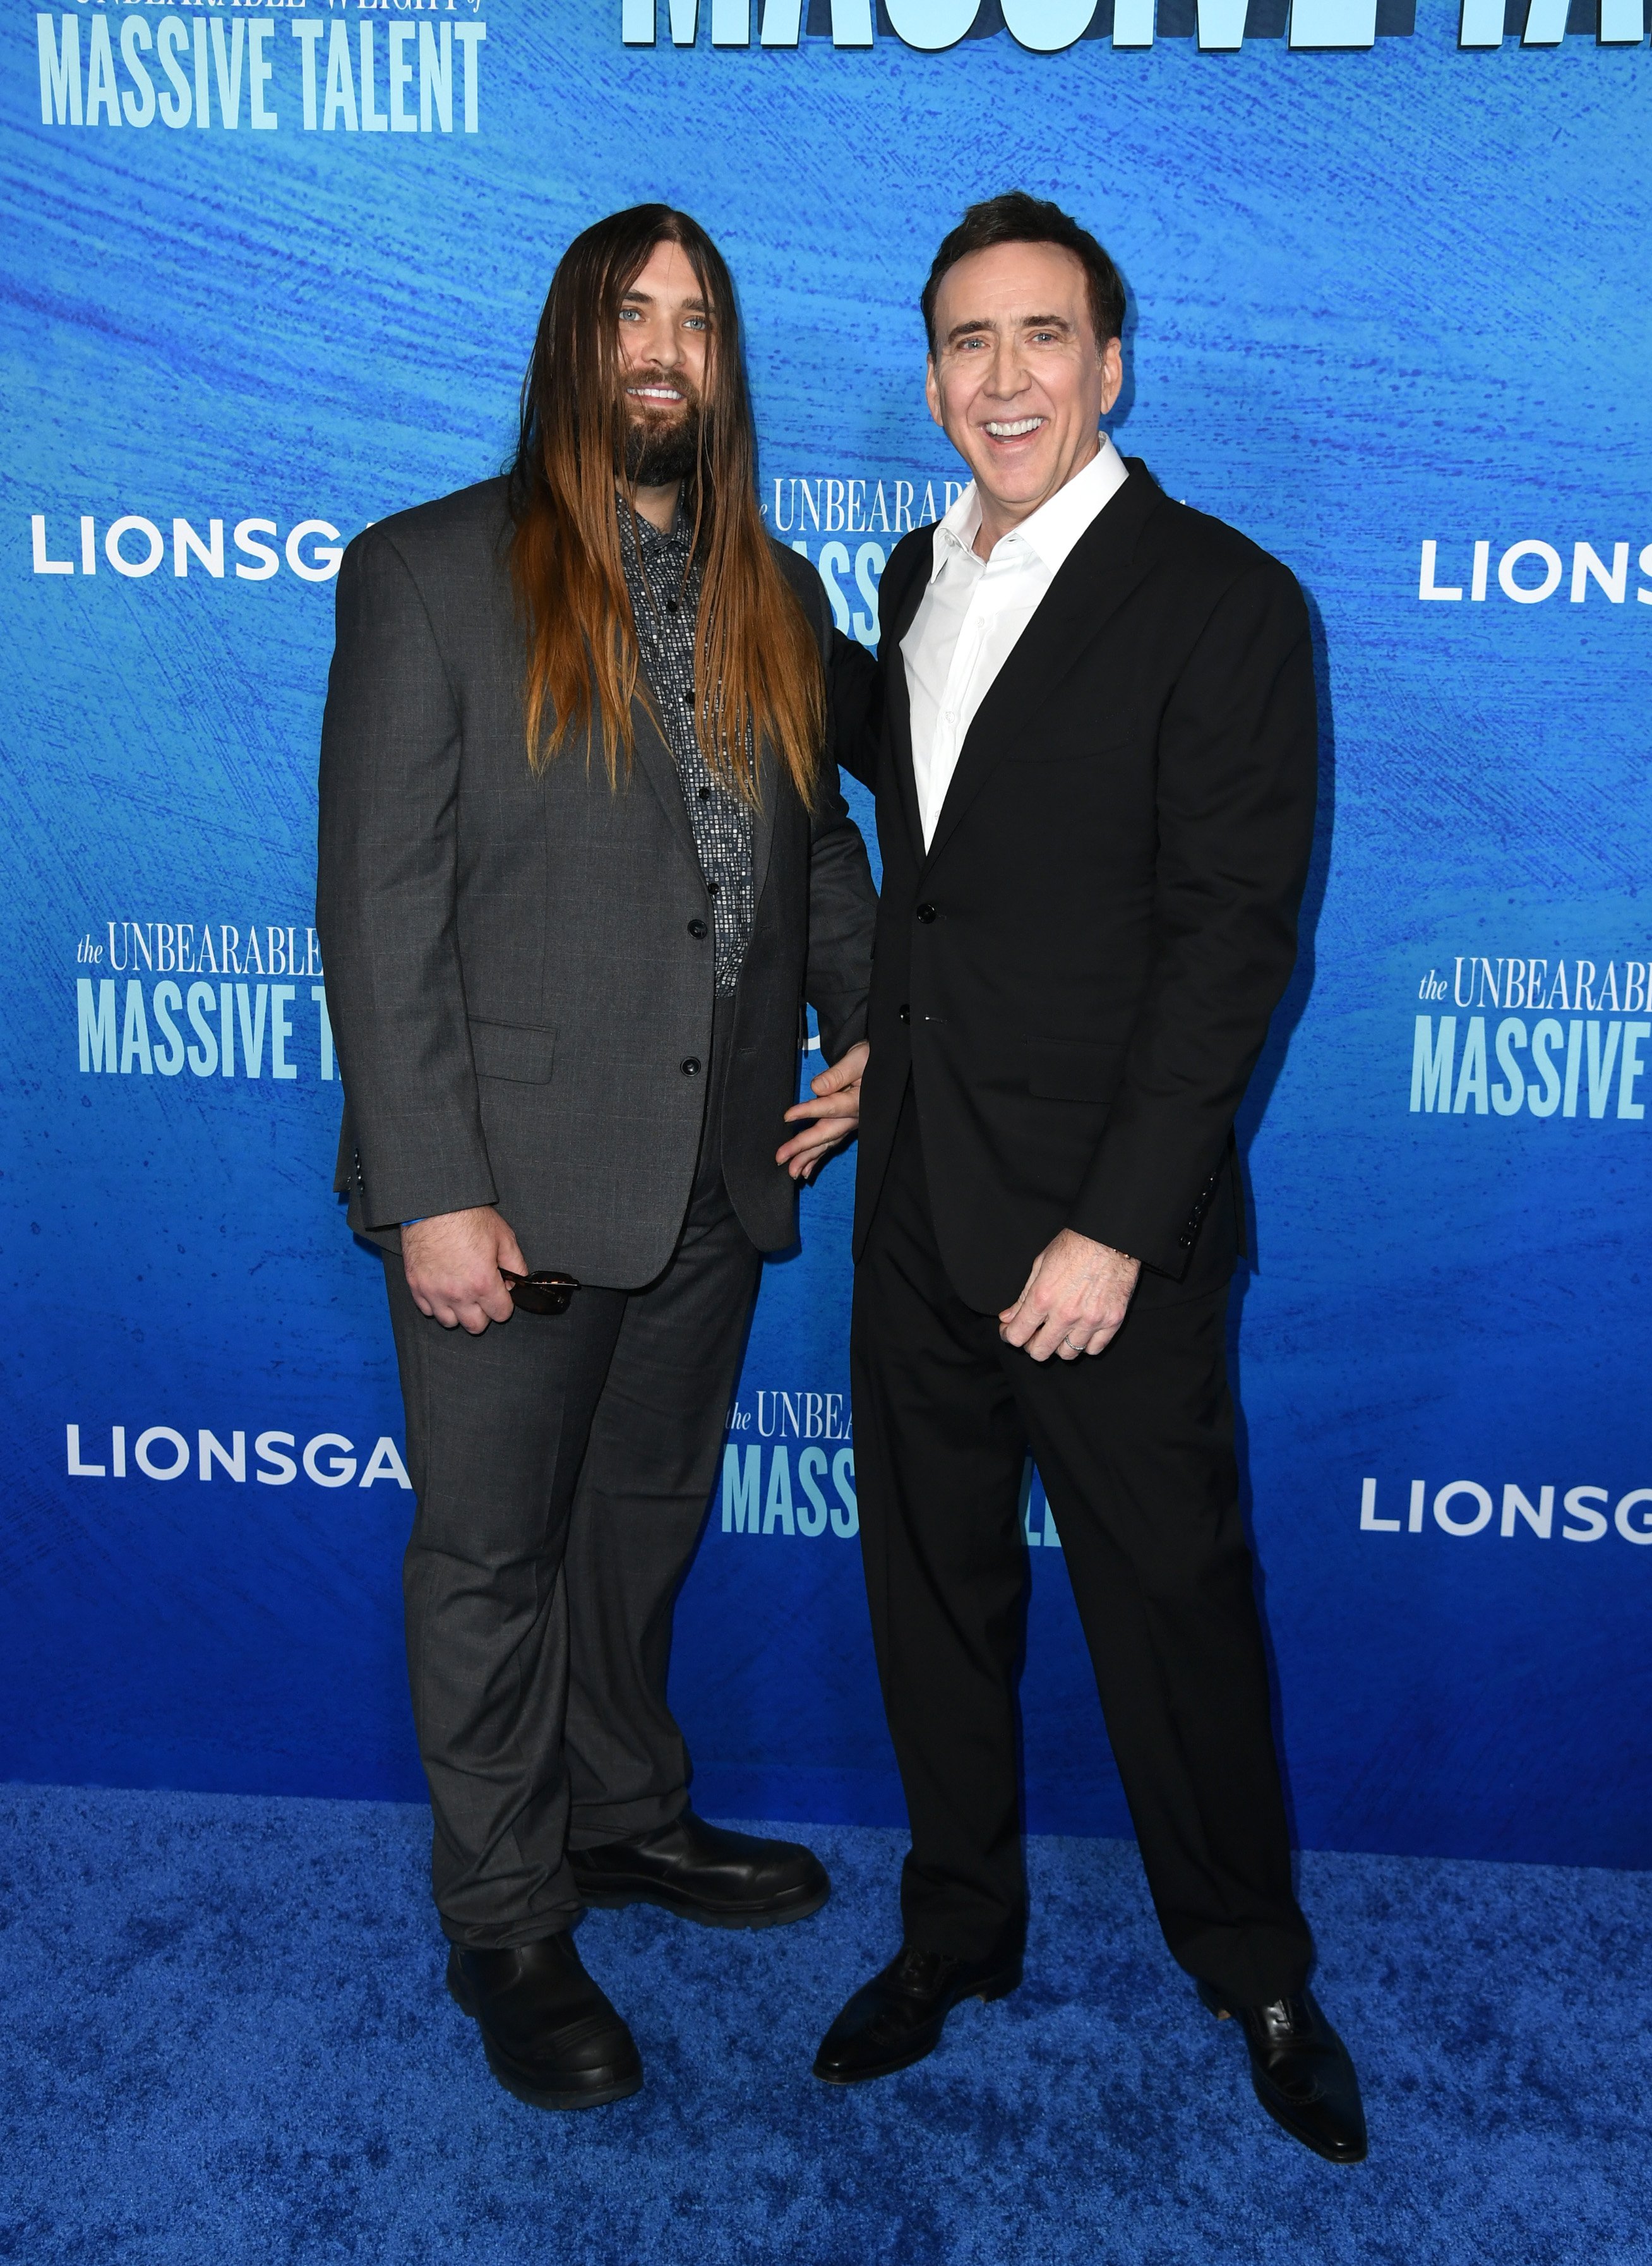 Nicolas Cage and son Weston Coppola Cage attend the Los Angeles special screening of "The Unbearable Weight of Massive Talent" at DGA Theater Complex on April 18, 2022 in Los Angeles, California. | Source: Getty Images